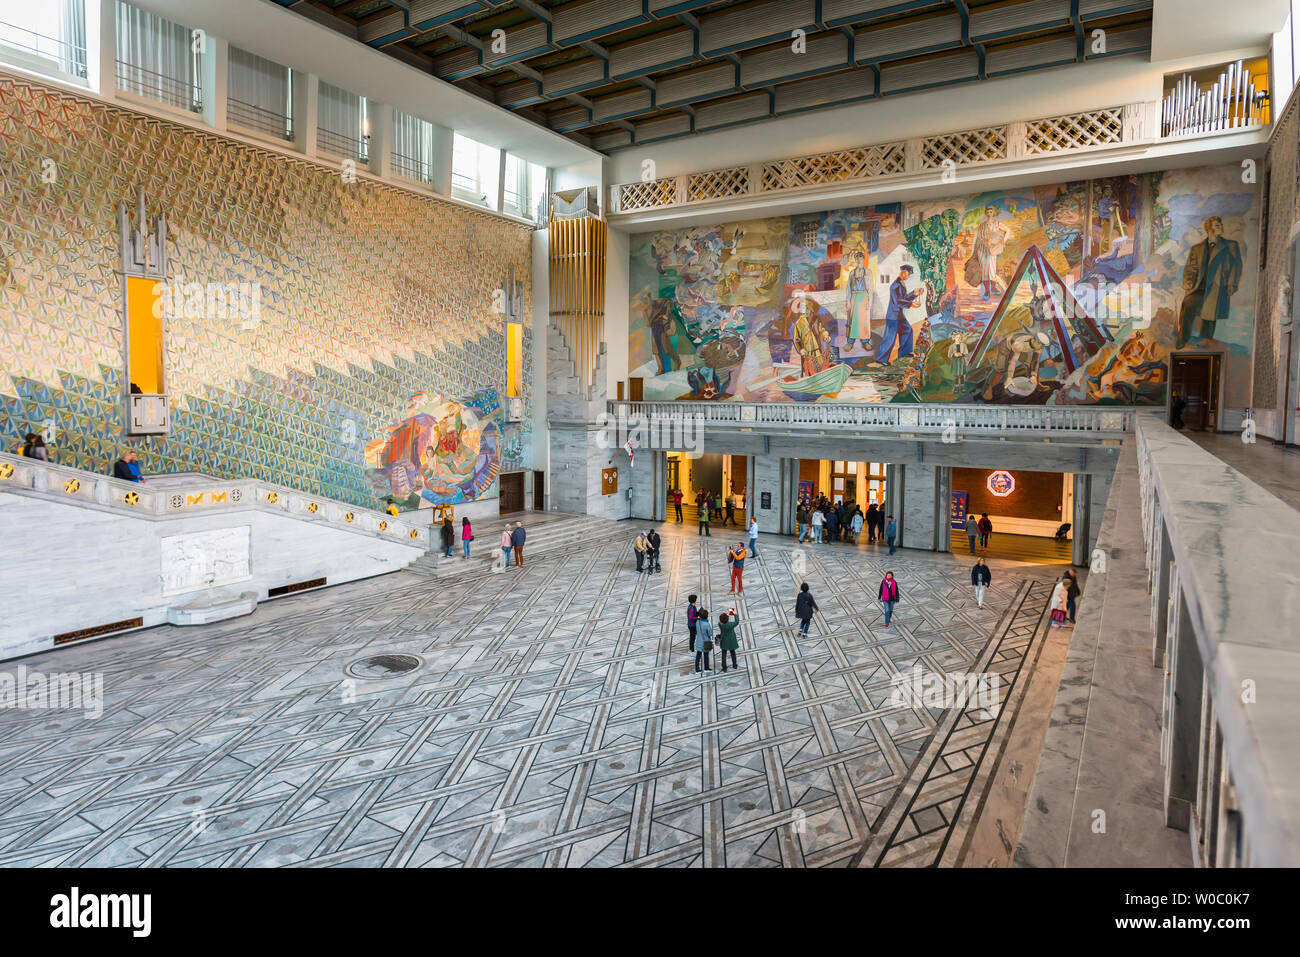 Oslo City Hall, view of the Great Hall inside the Oslo City Hall (Radhus) with a huge fresco celebrating Norwegian working life by Alf Rolfsen visible. Stock Photo